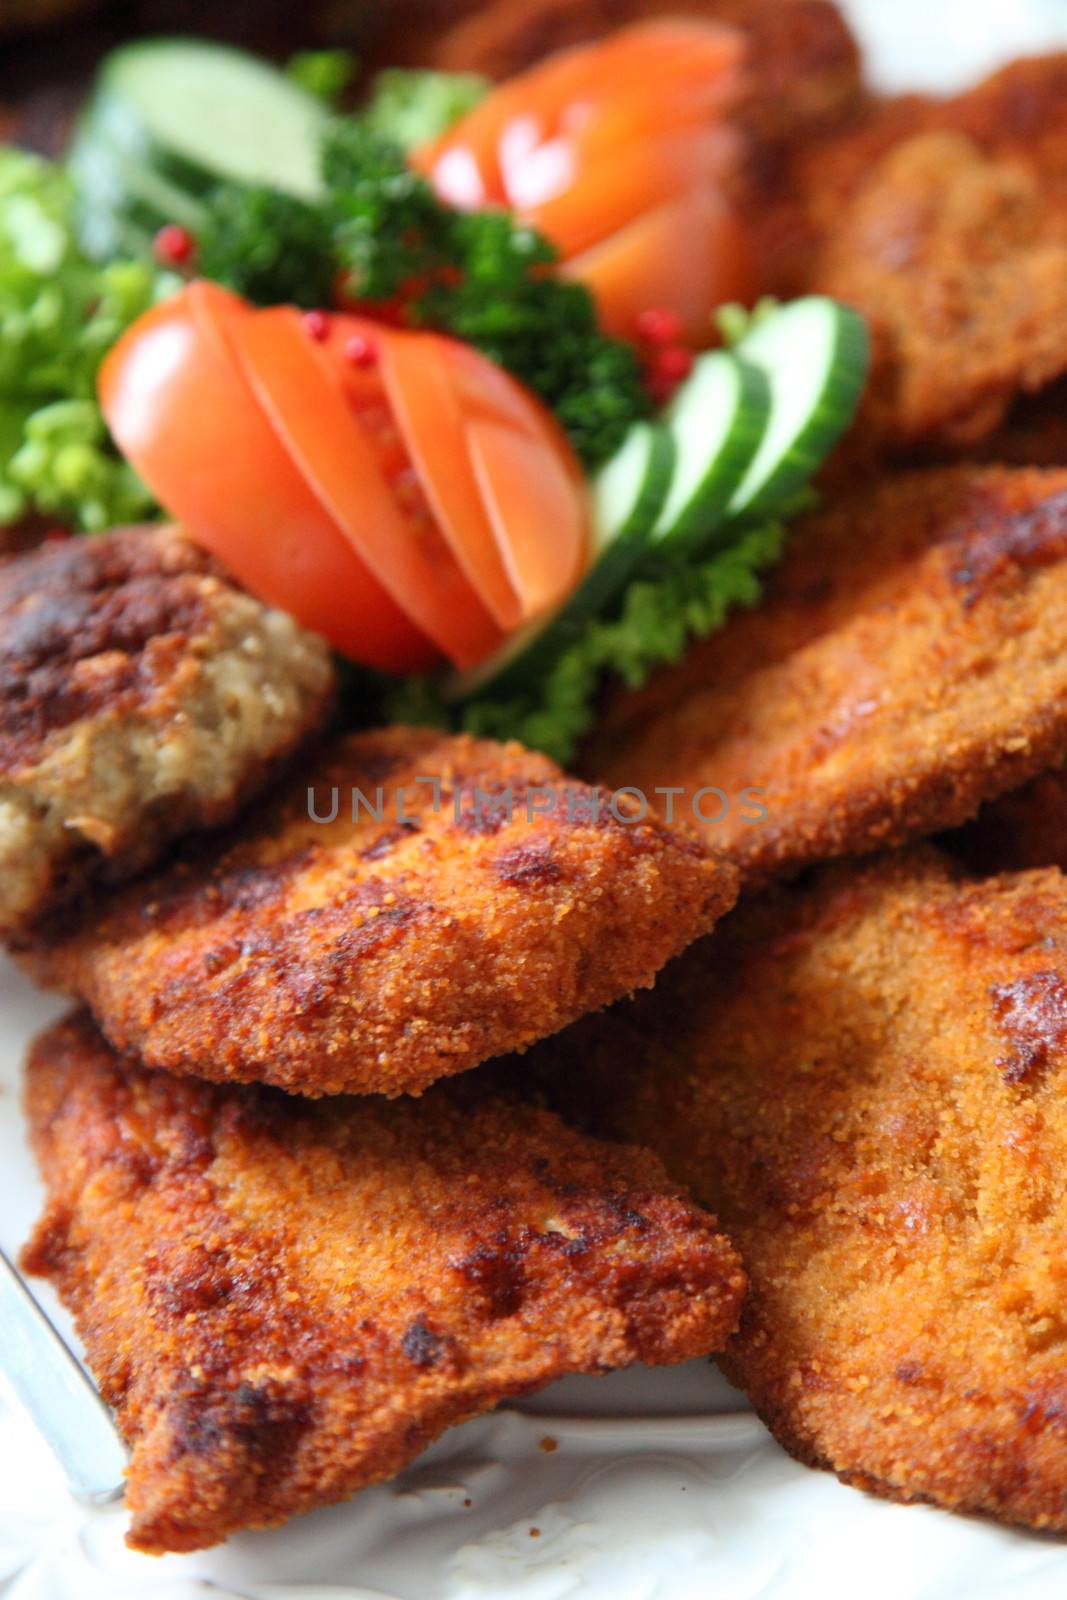 Crumbed fried meat on a buffet table with fresh salads, closeup view with shallow dof